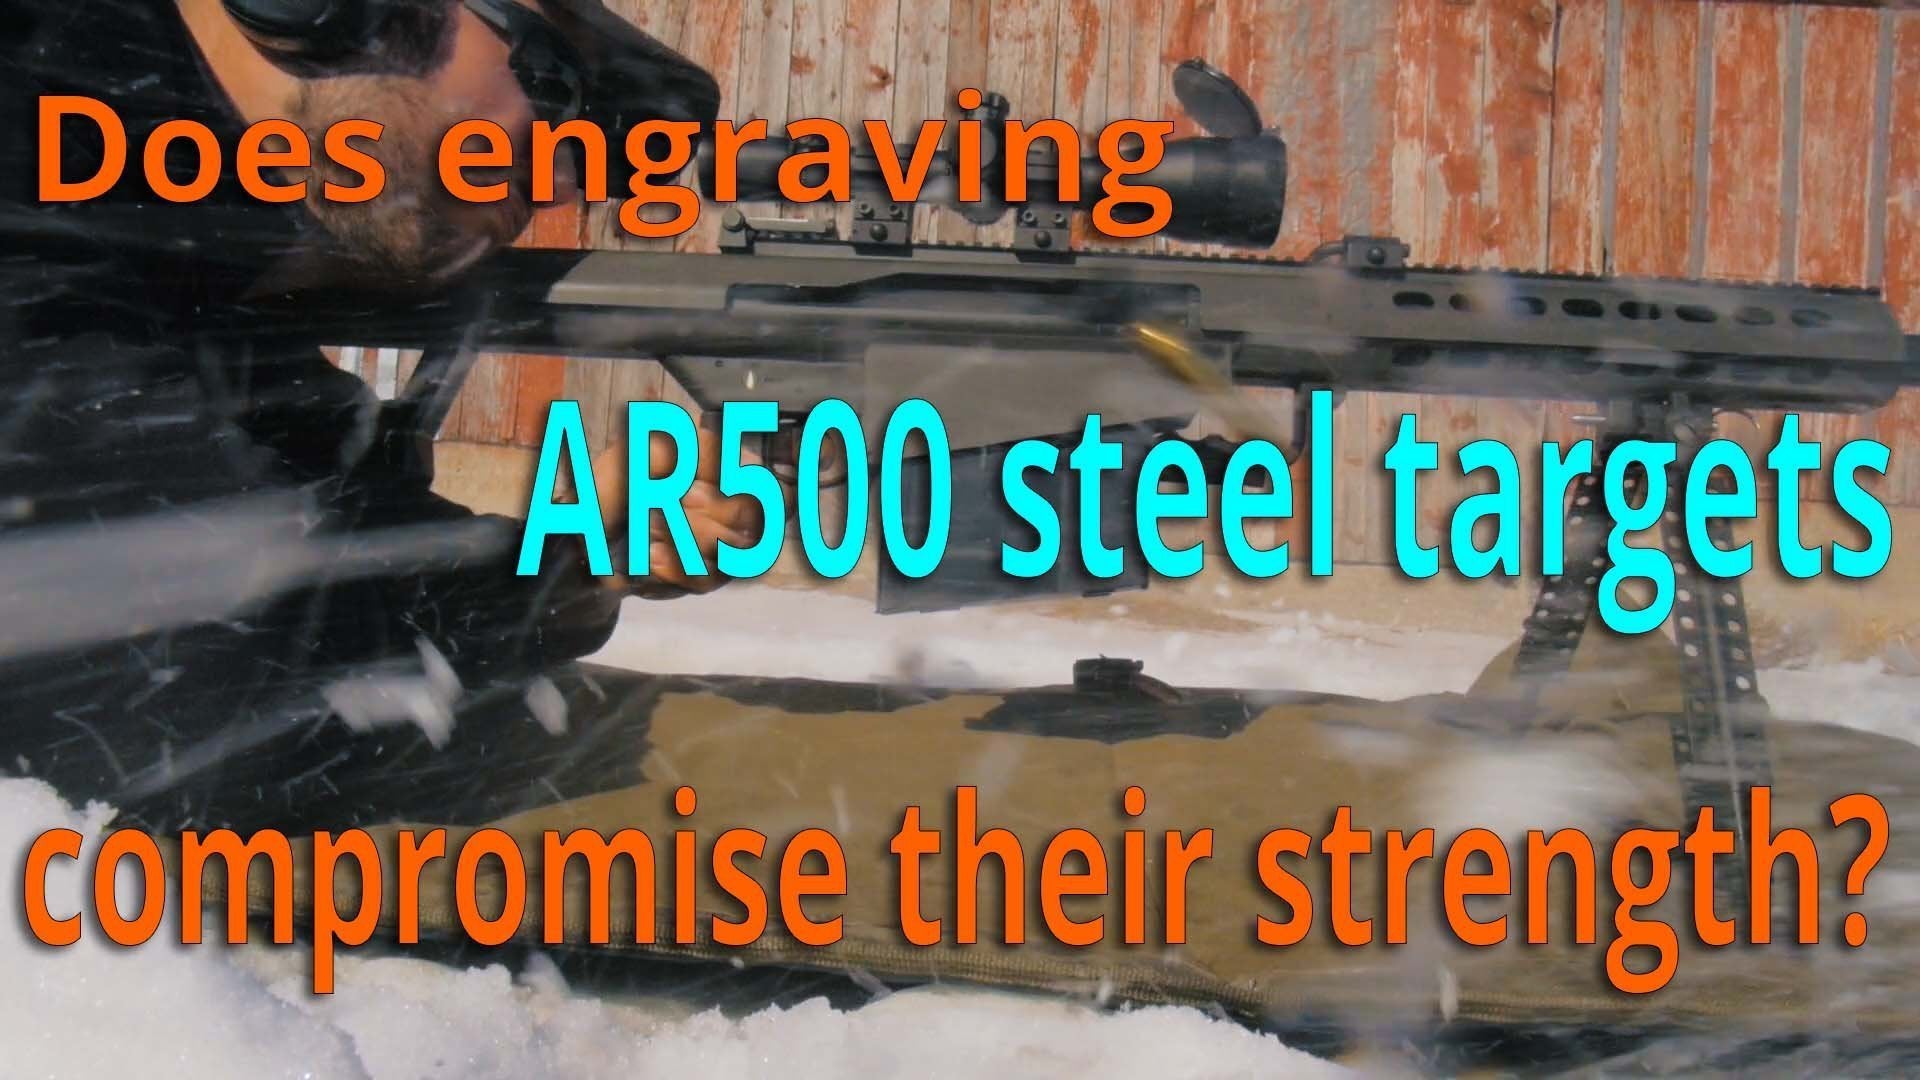 Do engraved vitals compromise the integrity of an AR500 steel target?